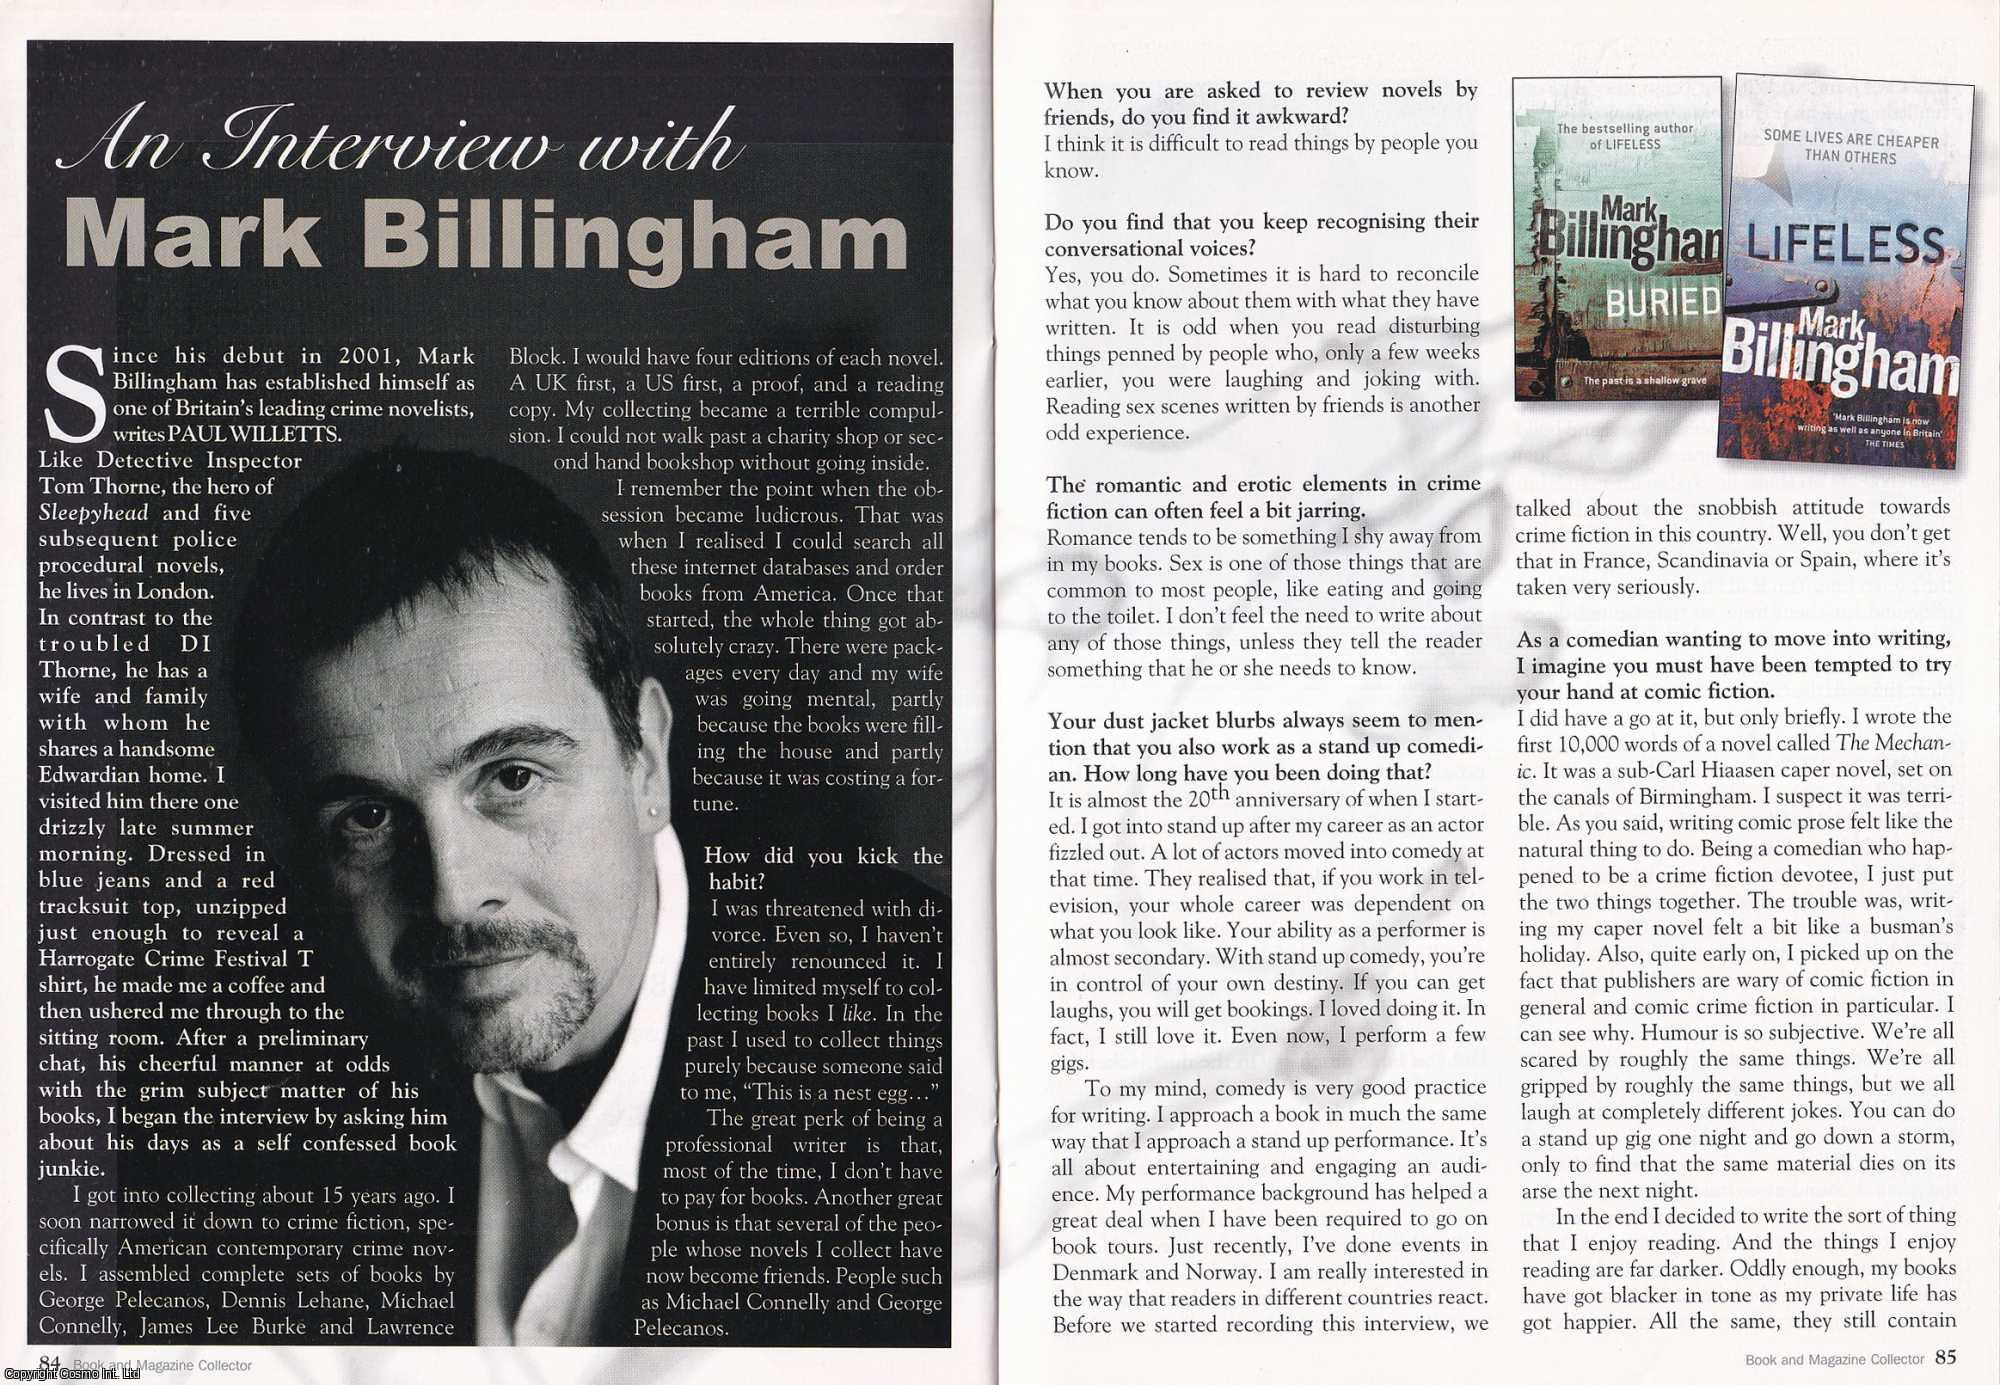 Paul Willetts - An Interview with Mark Billlingham. This is an original article separated from an issue of The Book & Magazine Collector publication.